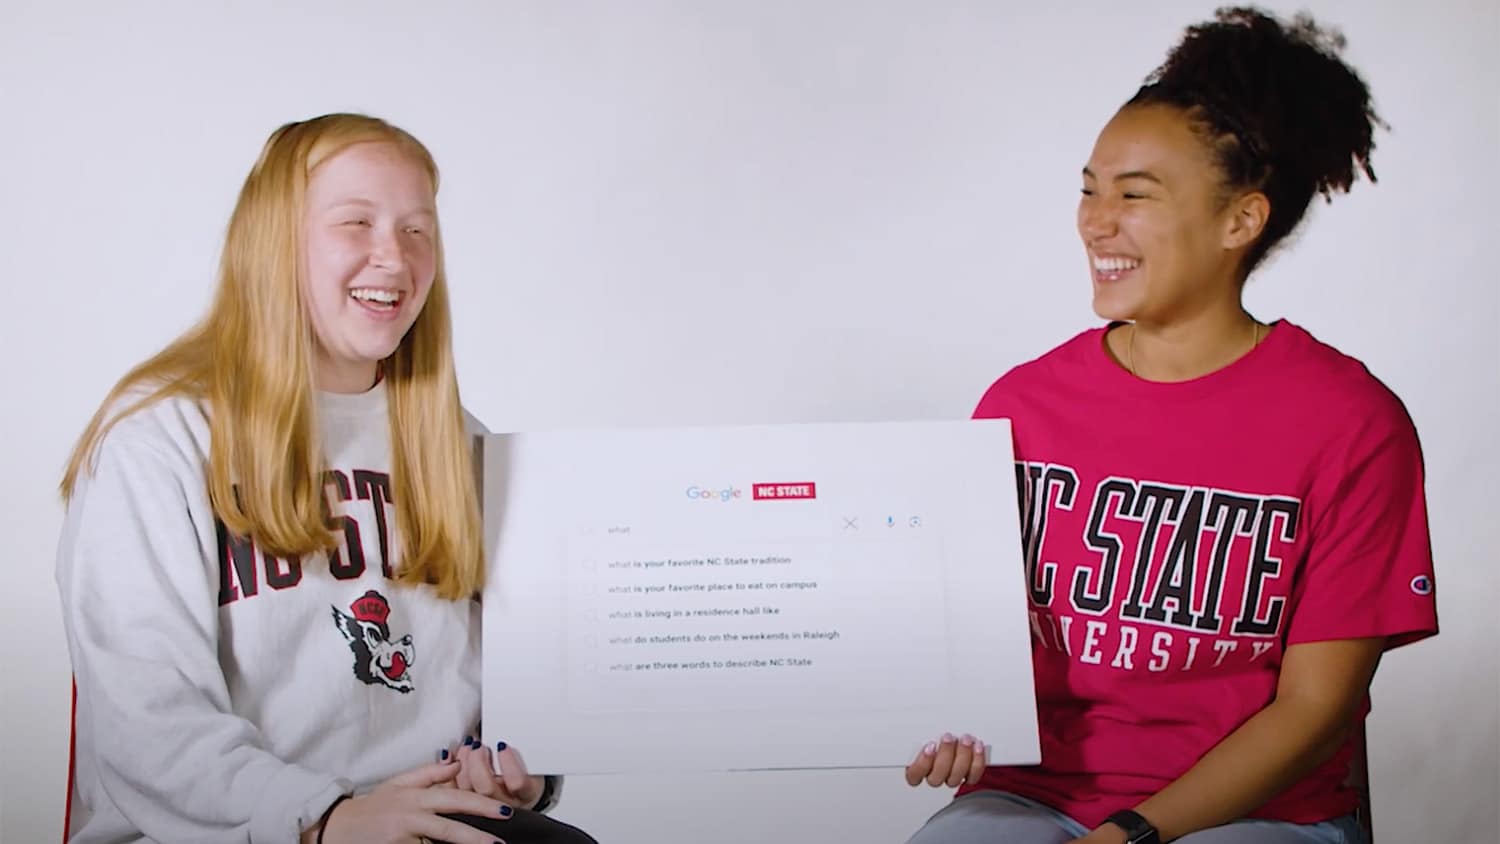 024
Four NC State University upperclassmen answer some of the most-asked questions about the university.